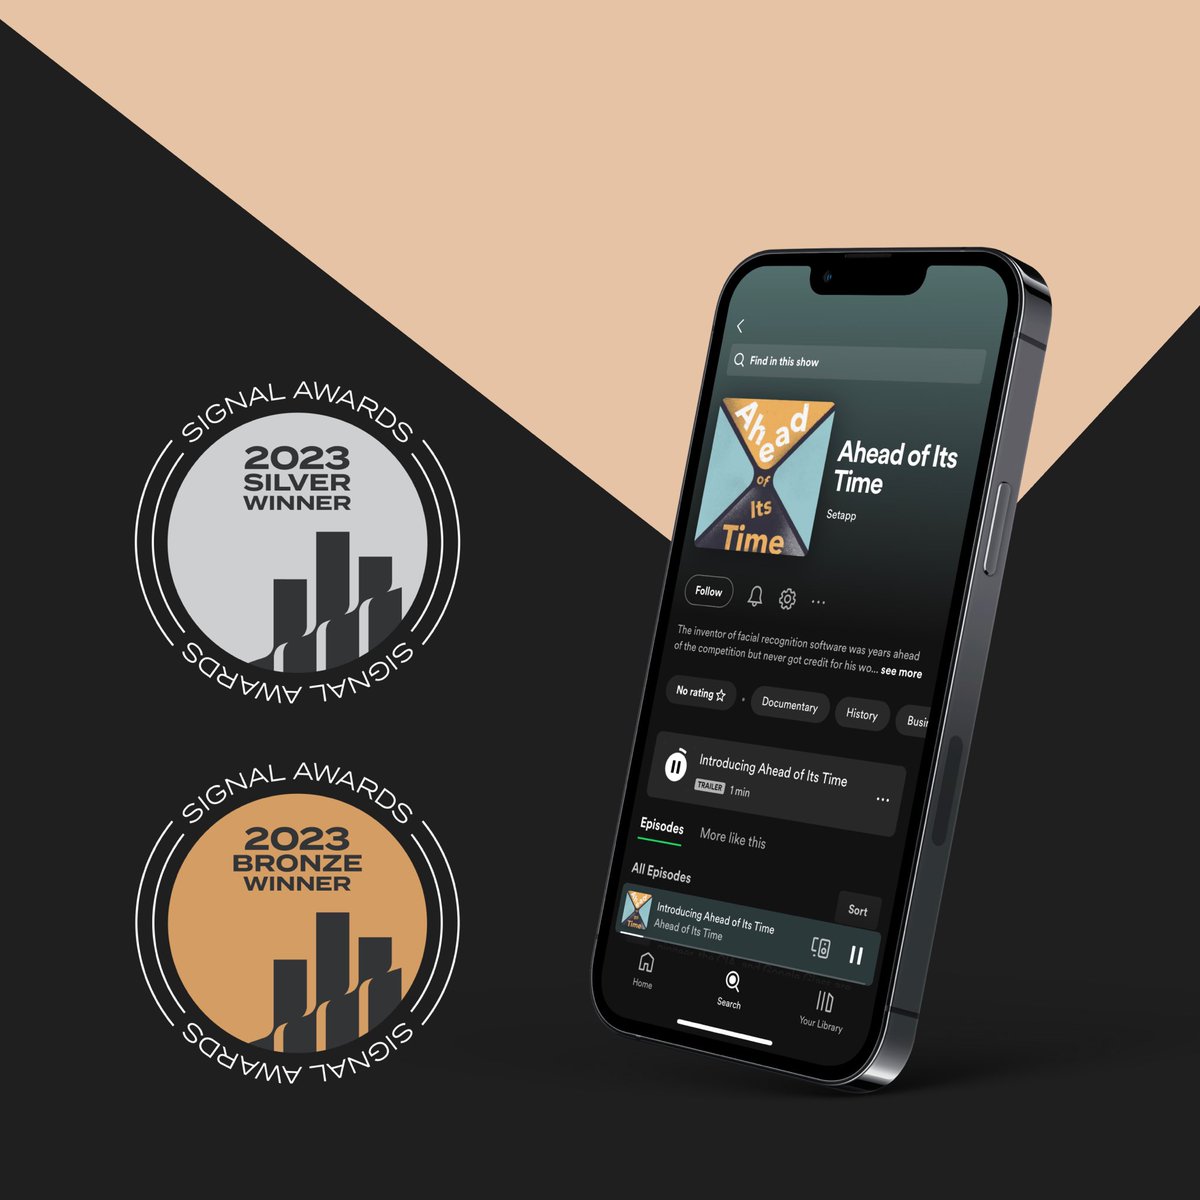 Yay, our Ahead of Its Time #podcast landed silver and bronze in @signalawards!  🥳 People love learning about tech underdogs who shaped the future! @pacificcontent, thank you for helping us create the show! 

Check out the winning episode on VR gloves: stpp.co/3QsH7WQ